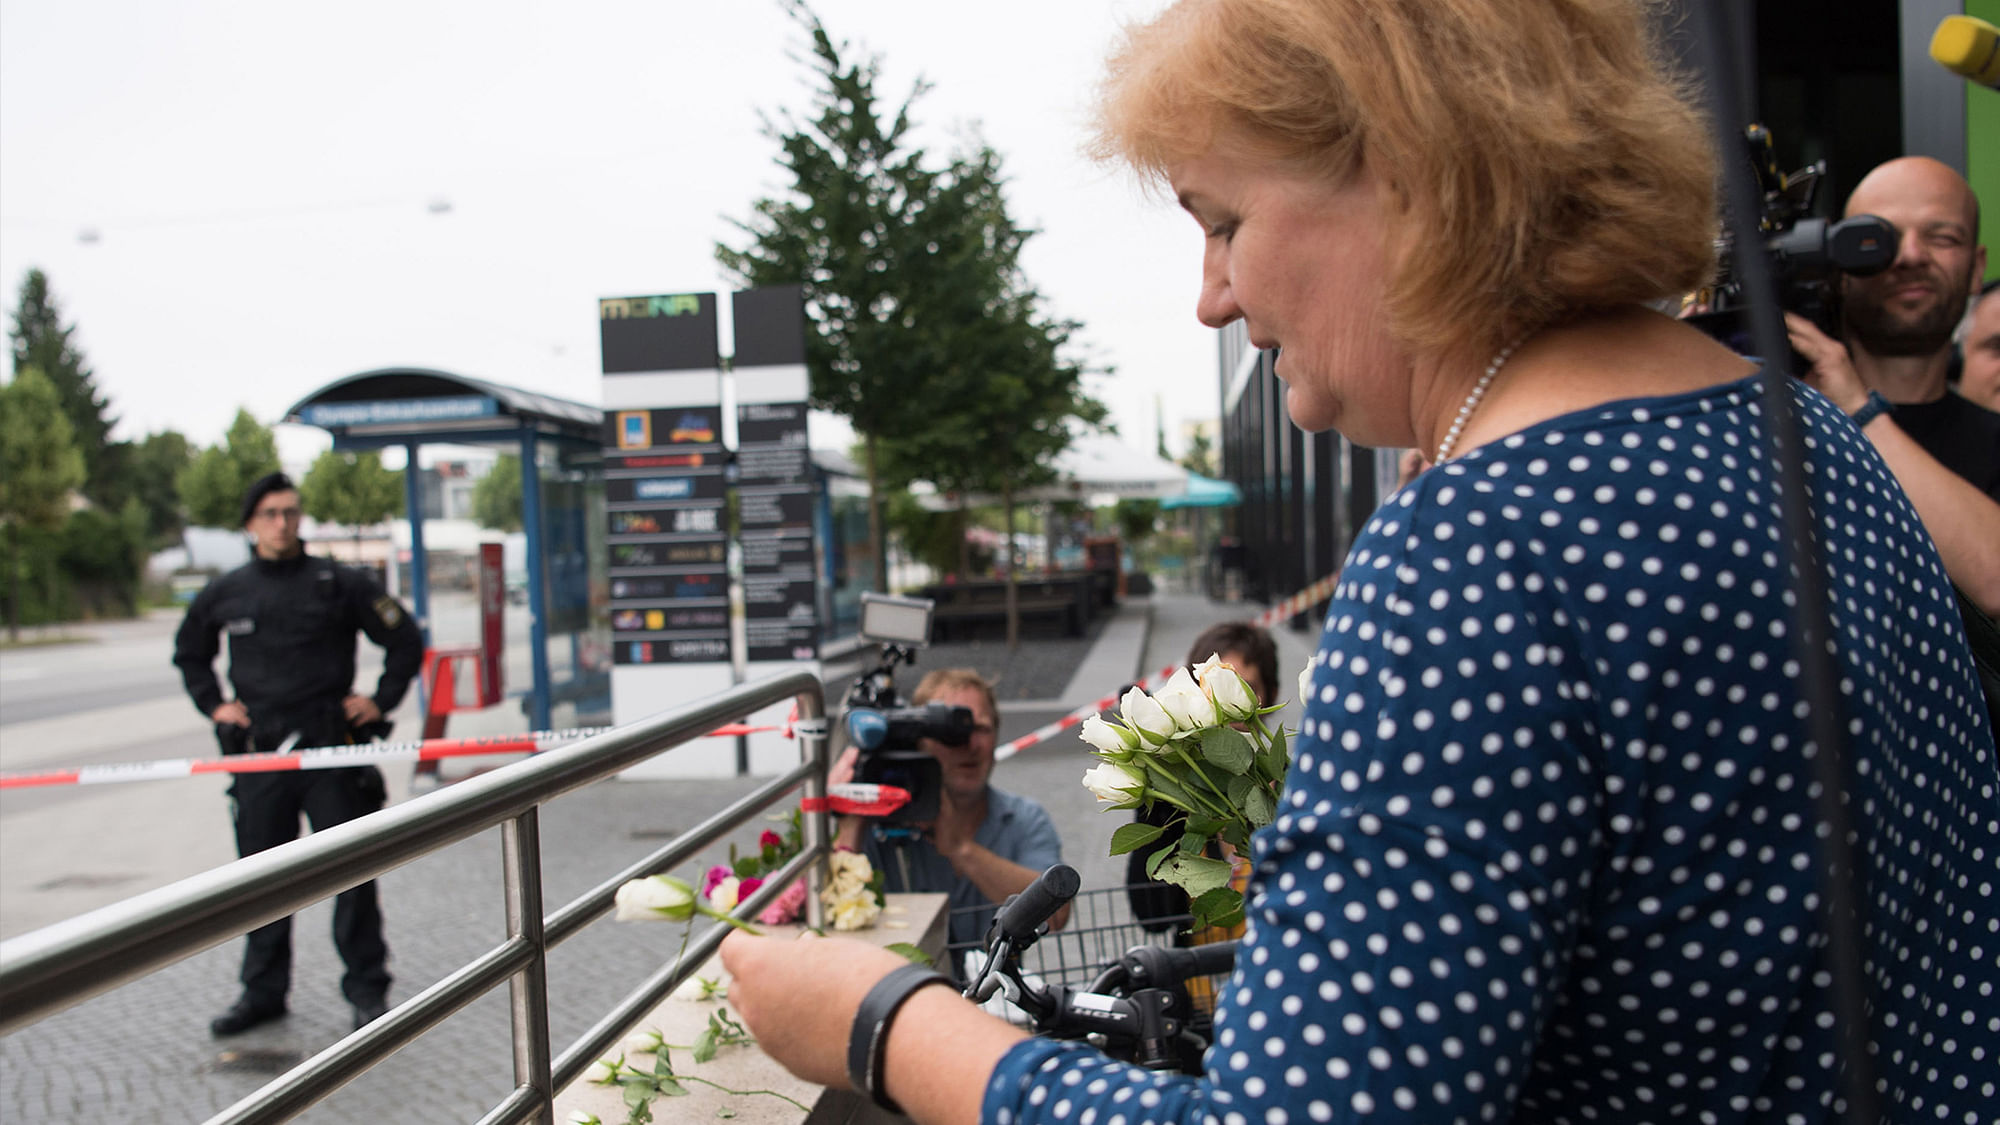 A woman puts down flowers near a mall where a shooting took place leaving nine people dead on Saturday. (Photo: AP)